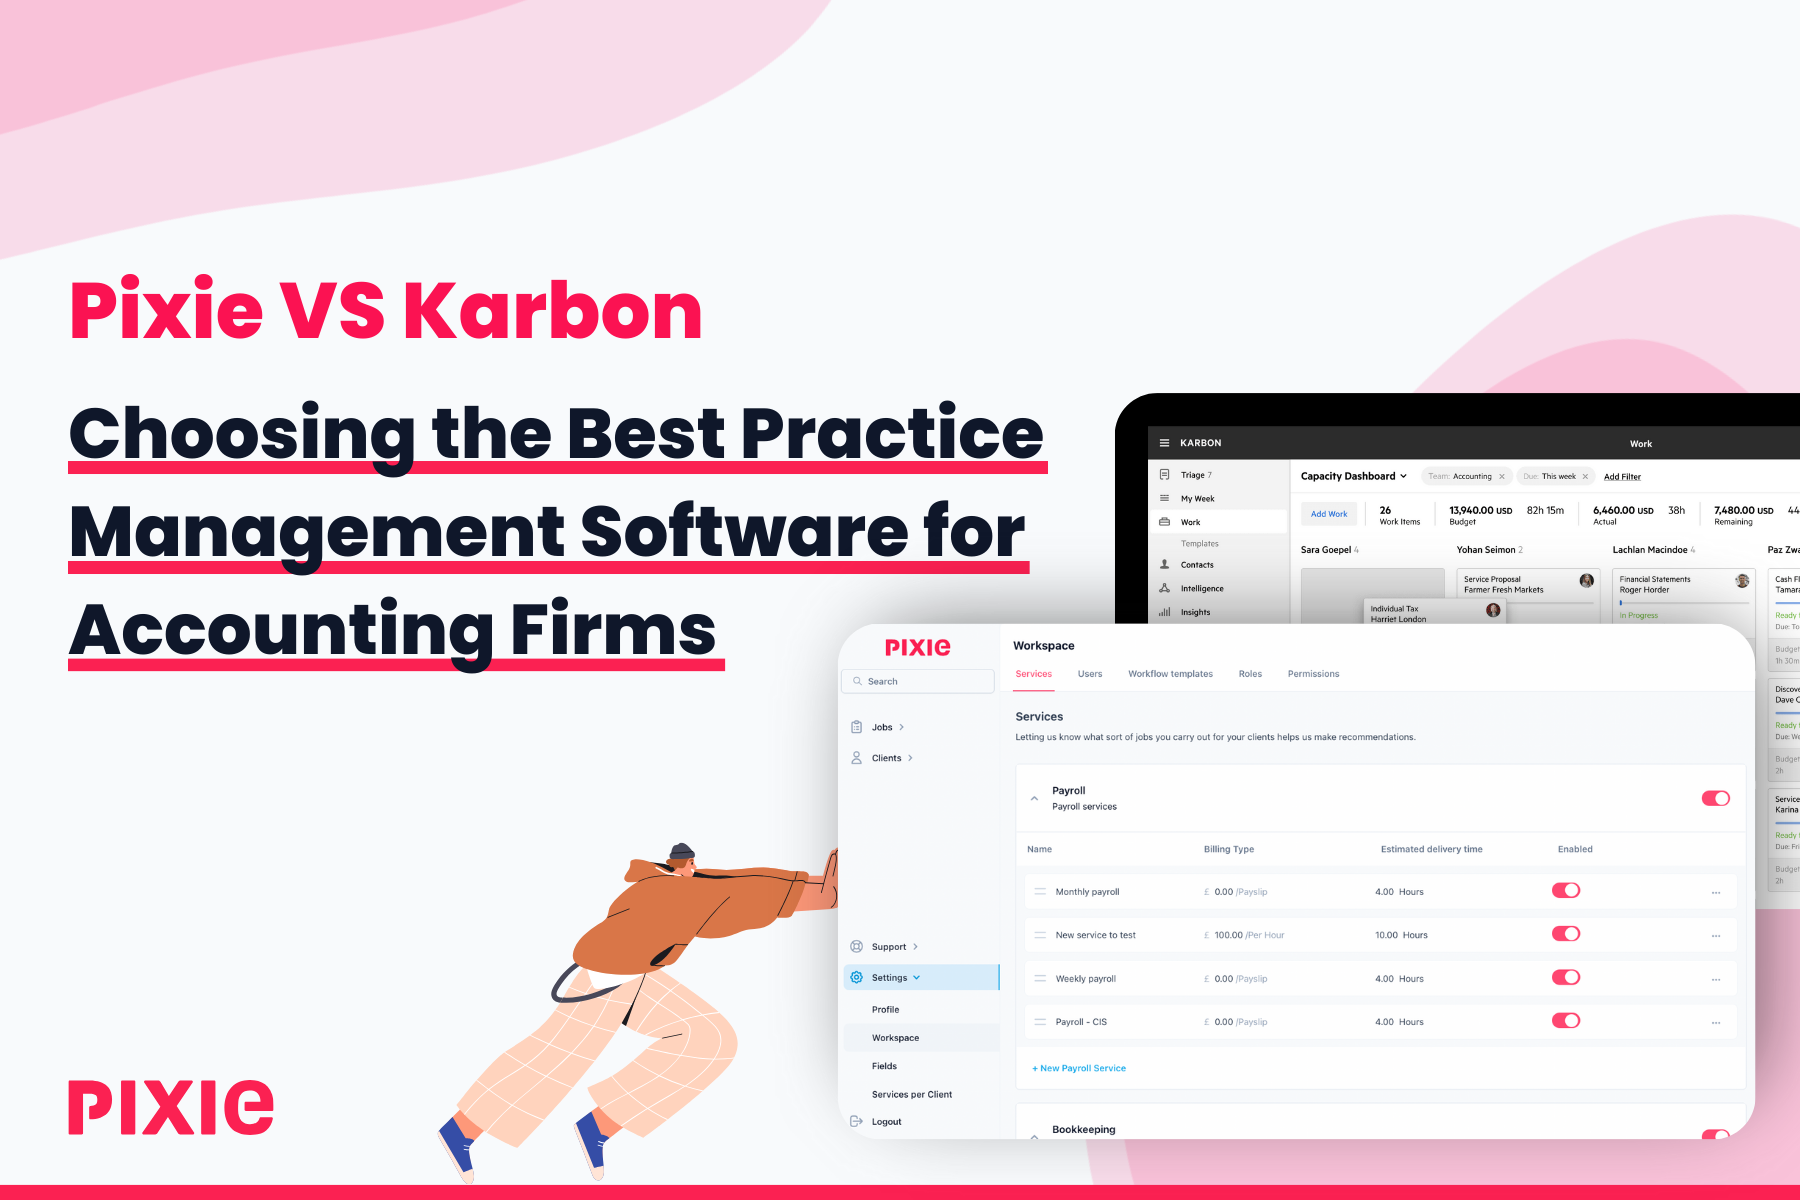 Pixie vs Karbon: Choosing the Best Practice Management Software for Accounting Firms